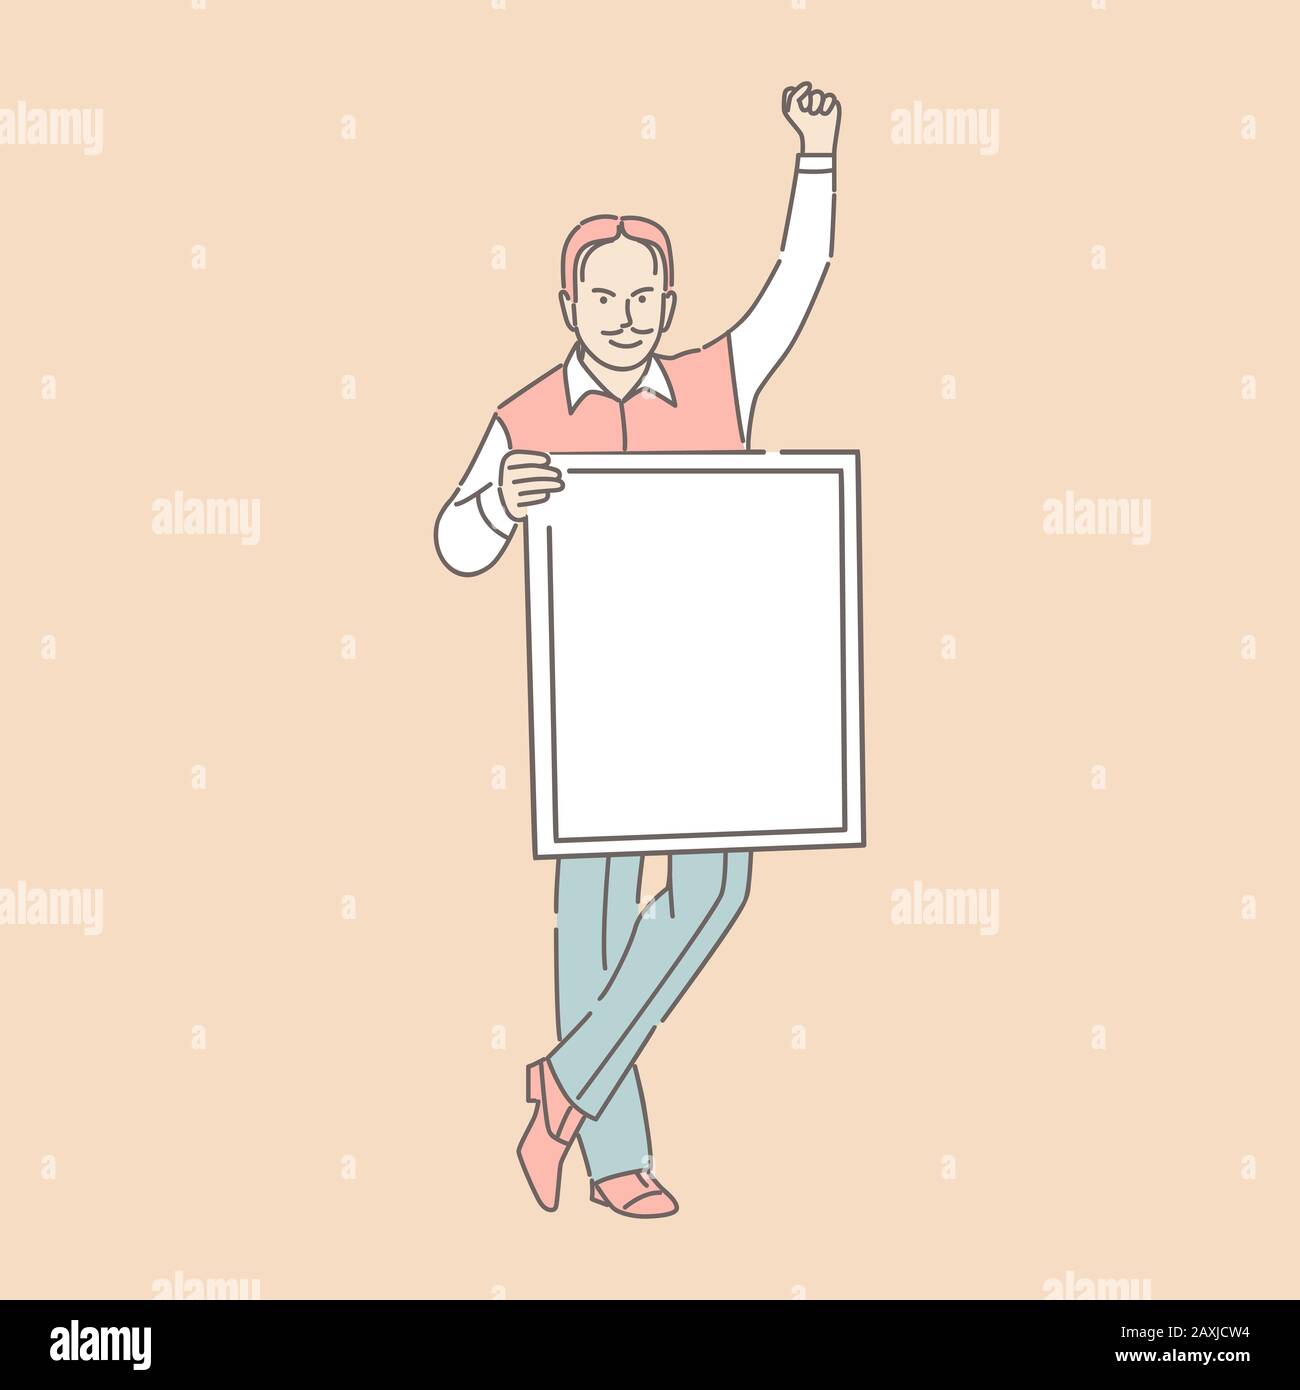 Smiling man in casual clothes holding card and raising hand up vector illustration. Cartoon outline character isolated on pink. Activism, demonstration, advertising, protesting placard concept. Stock Vector